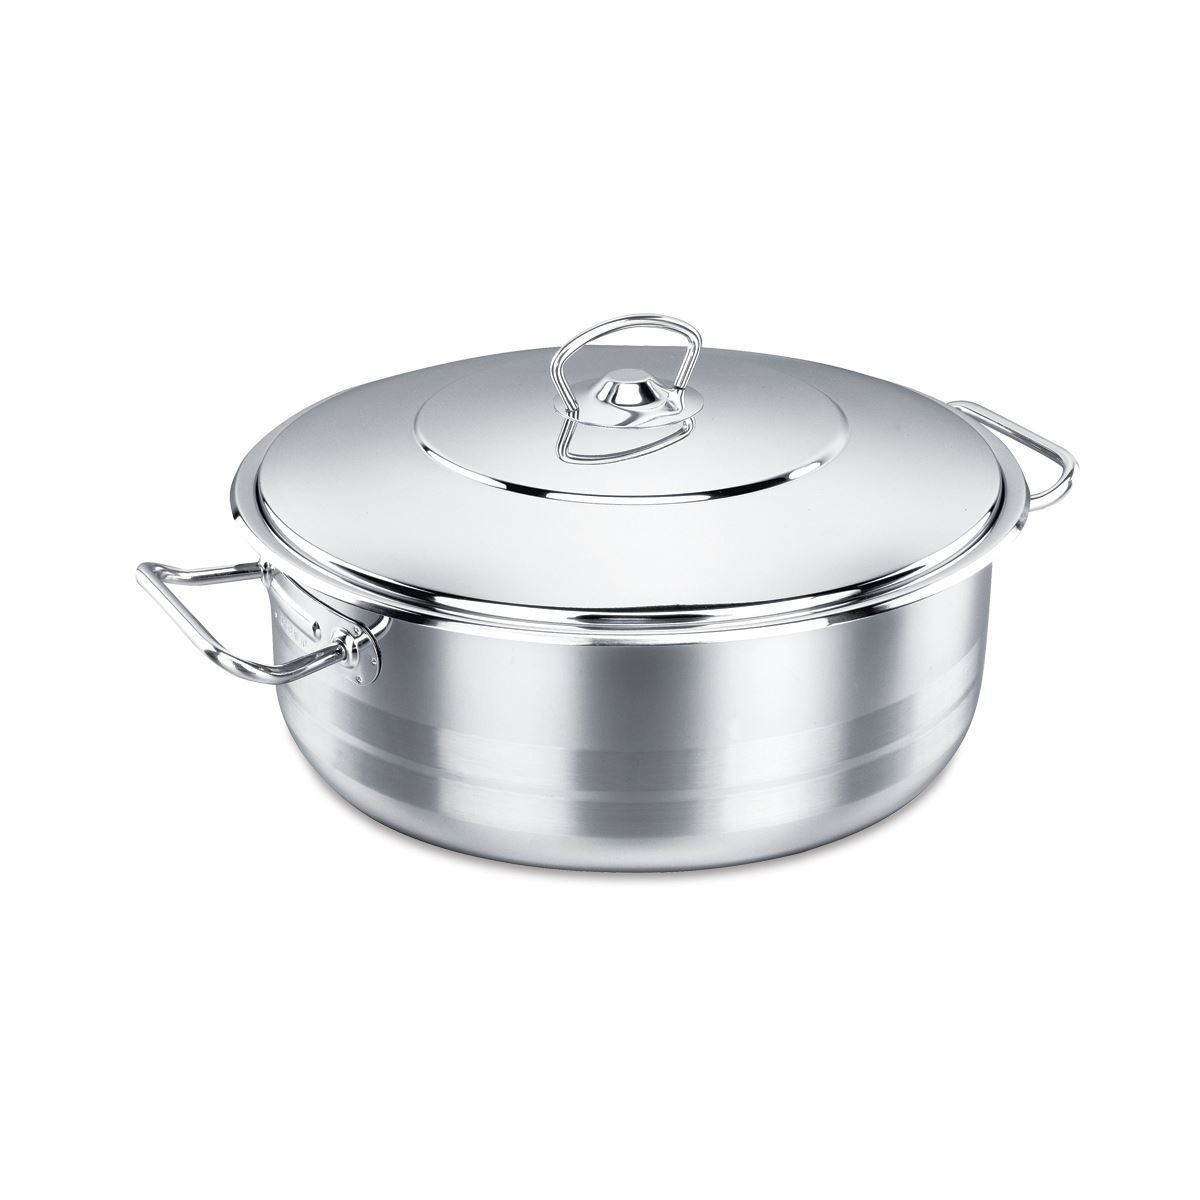 Korkmaz A1956 11 Qt. Classic 18 By 10 Stainless Steel Dutch Oven Shallow Covered Stockpot Cookware Induction